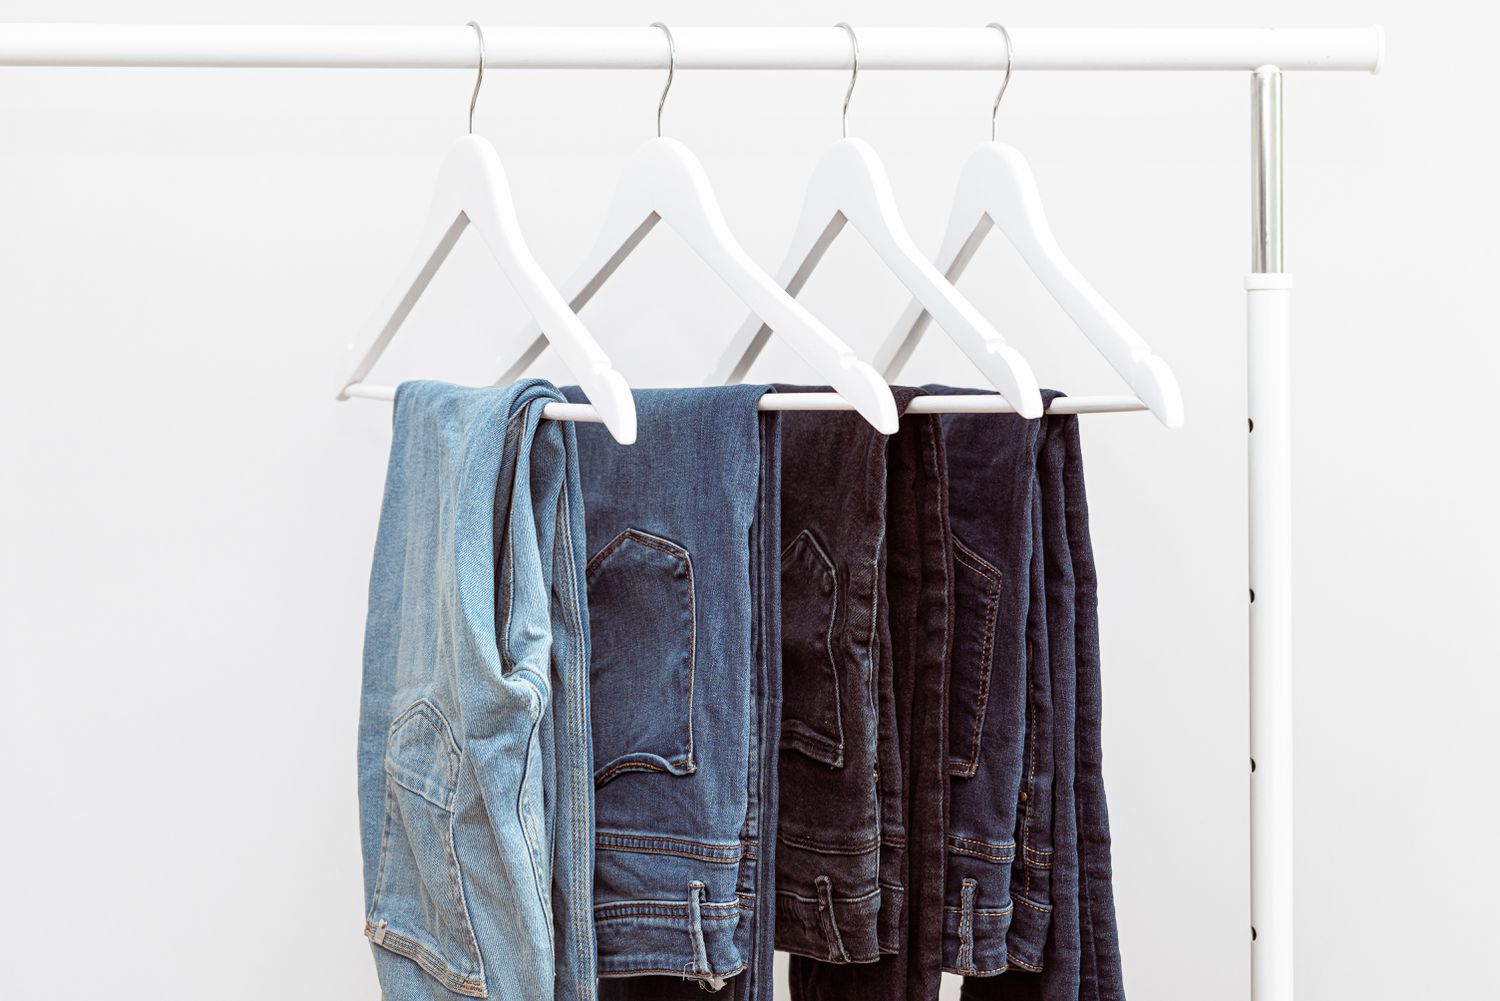 How To Hang Pants In A Closet?